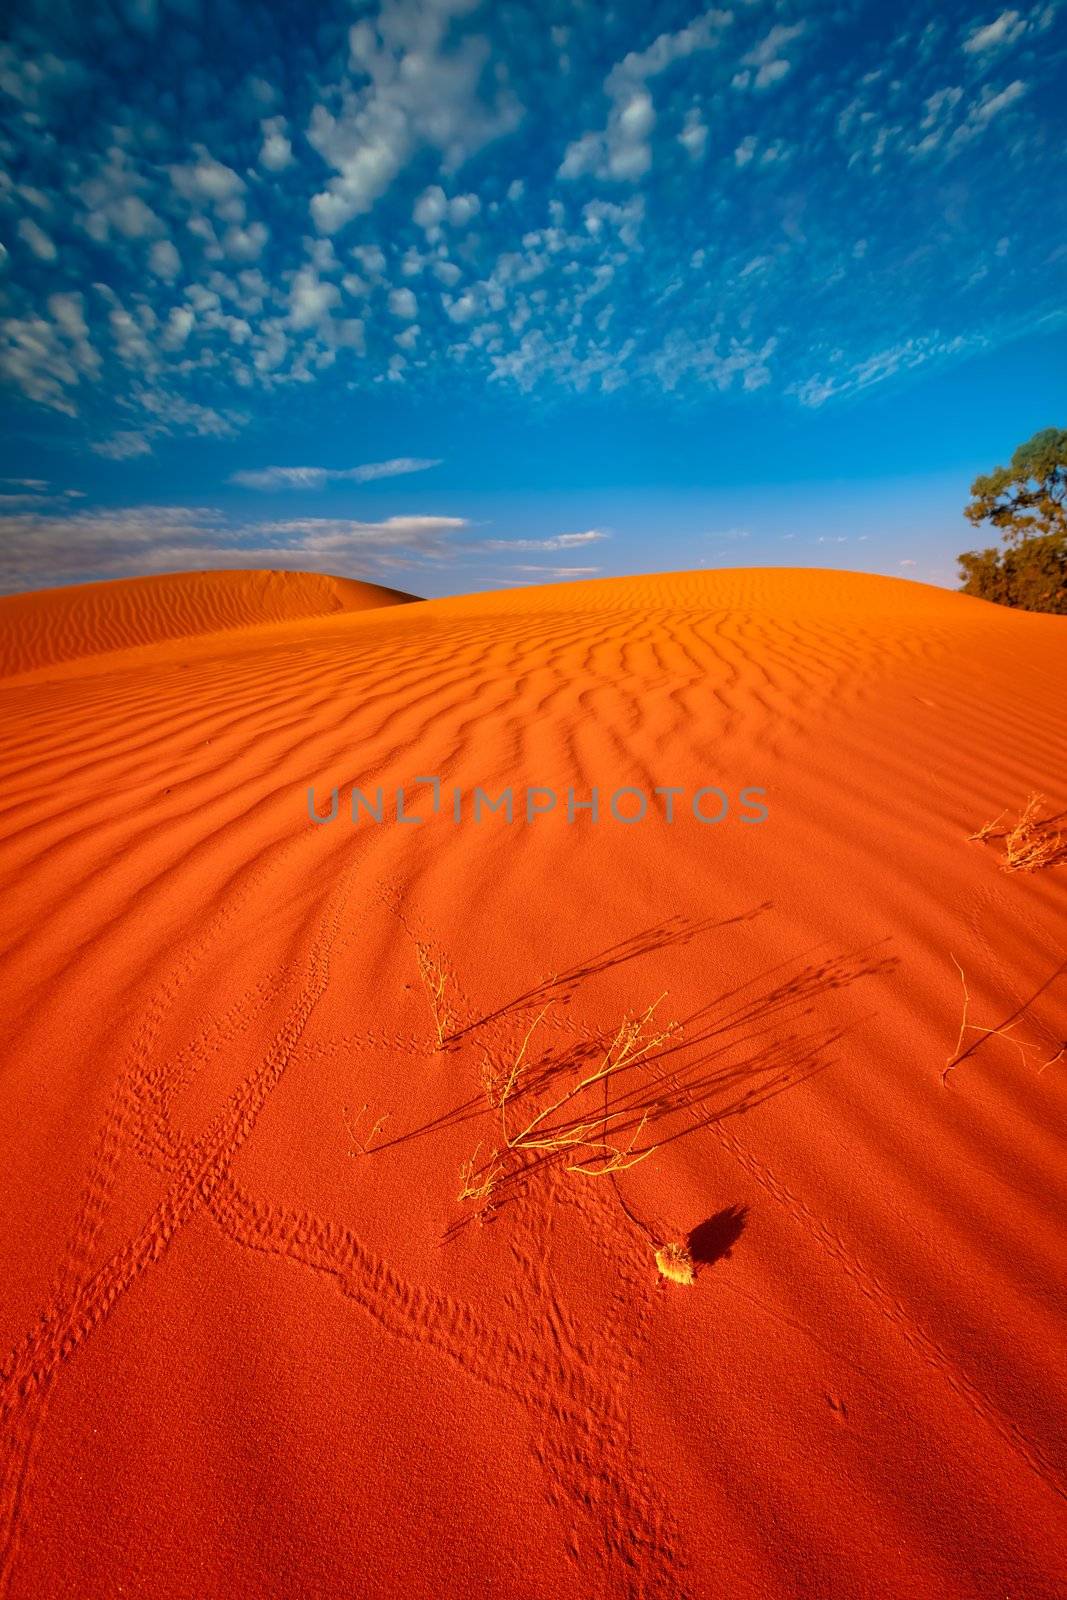 Animal tracks in red sand dune by hangingpixels